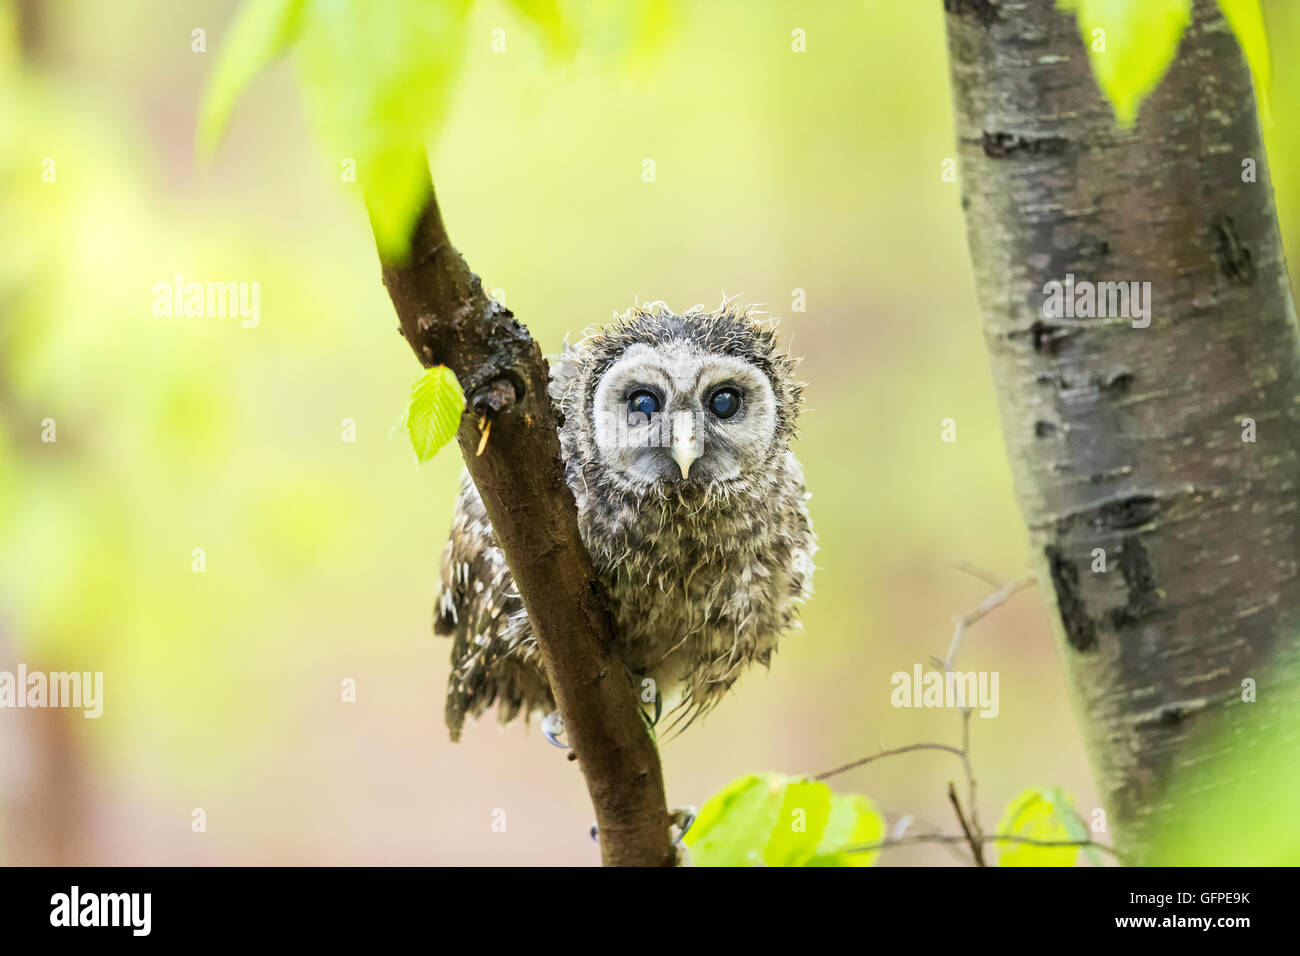 Soaked fledgling Barred Owl drying off its feathers while resting on branch Stock Photo